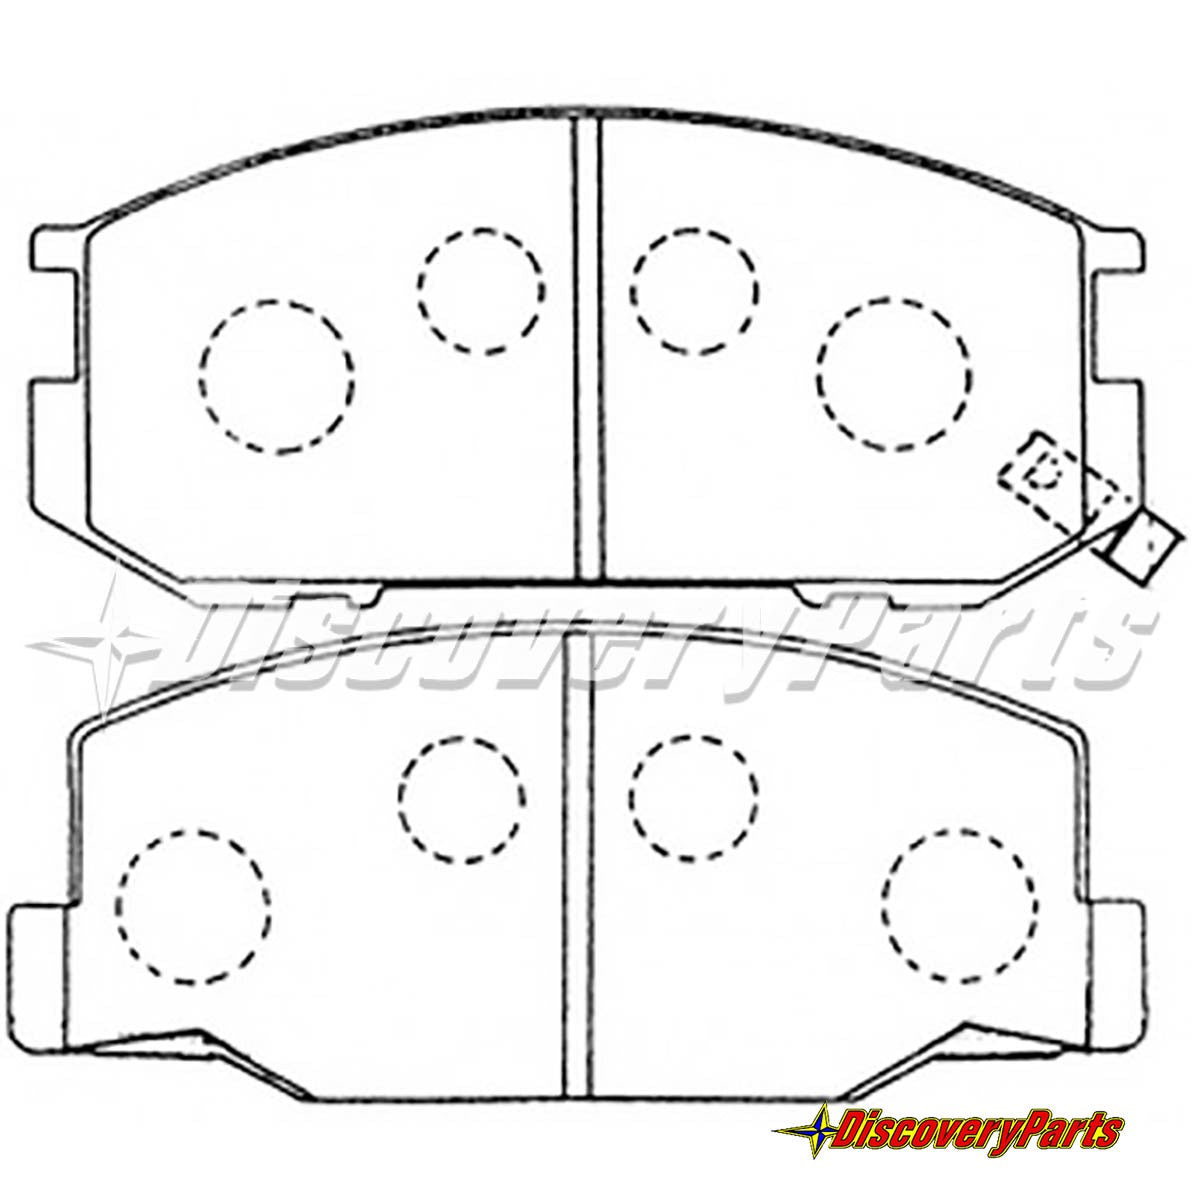 Carbotech CT245 Front Brake Pad - 82-85 Toyota Celica